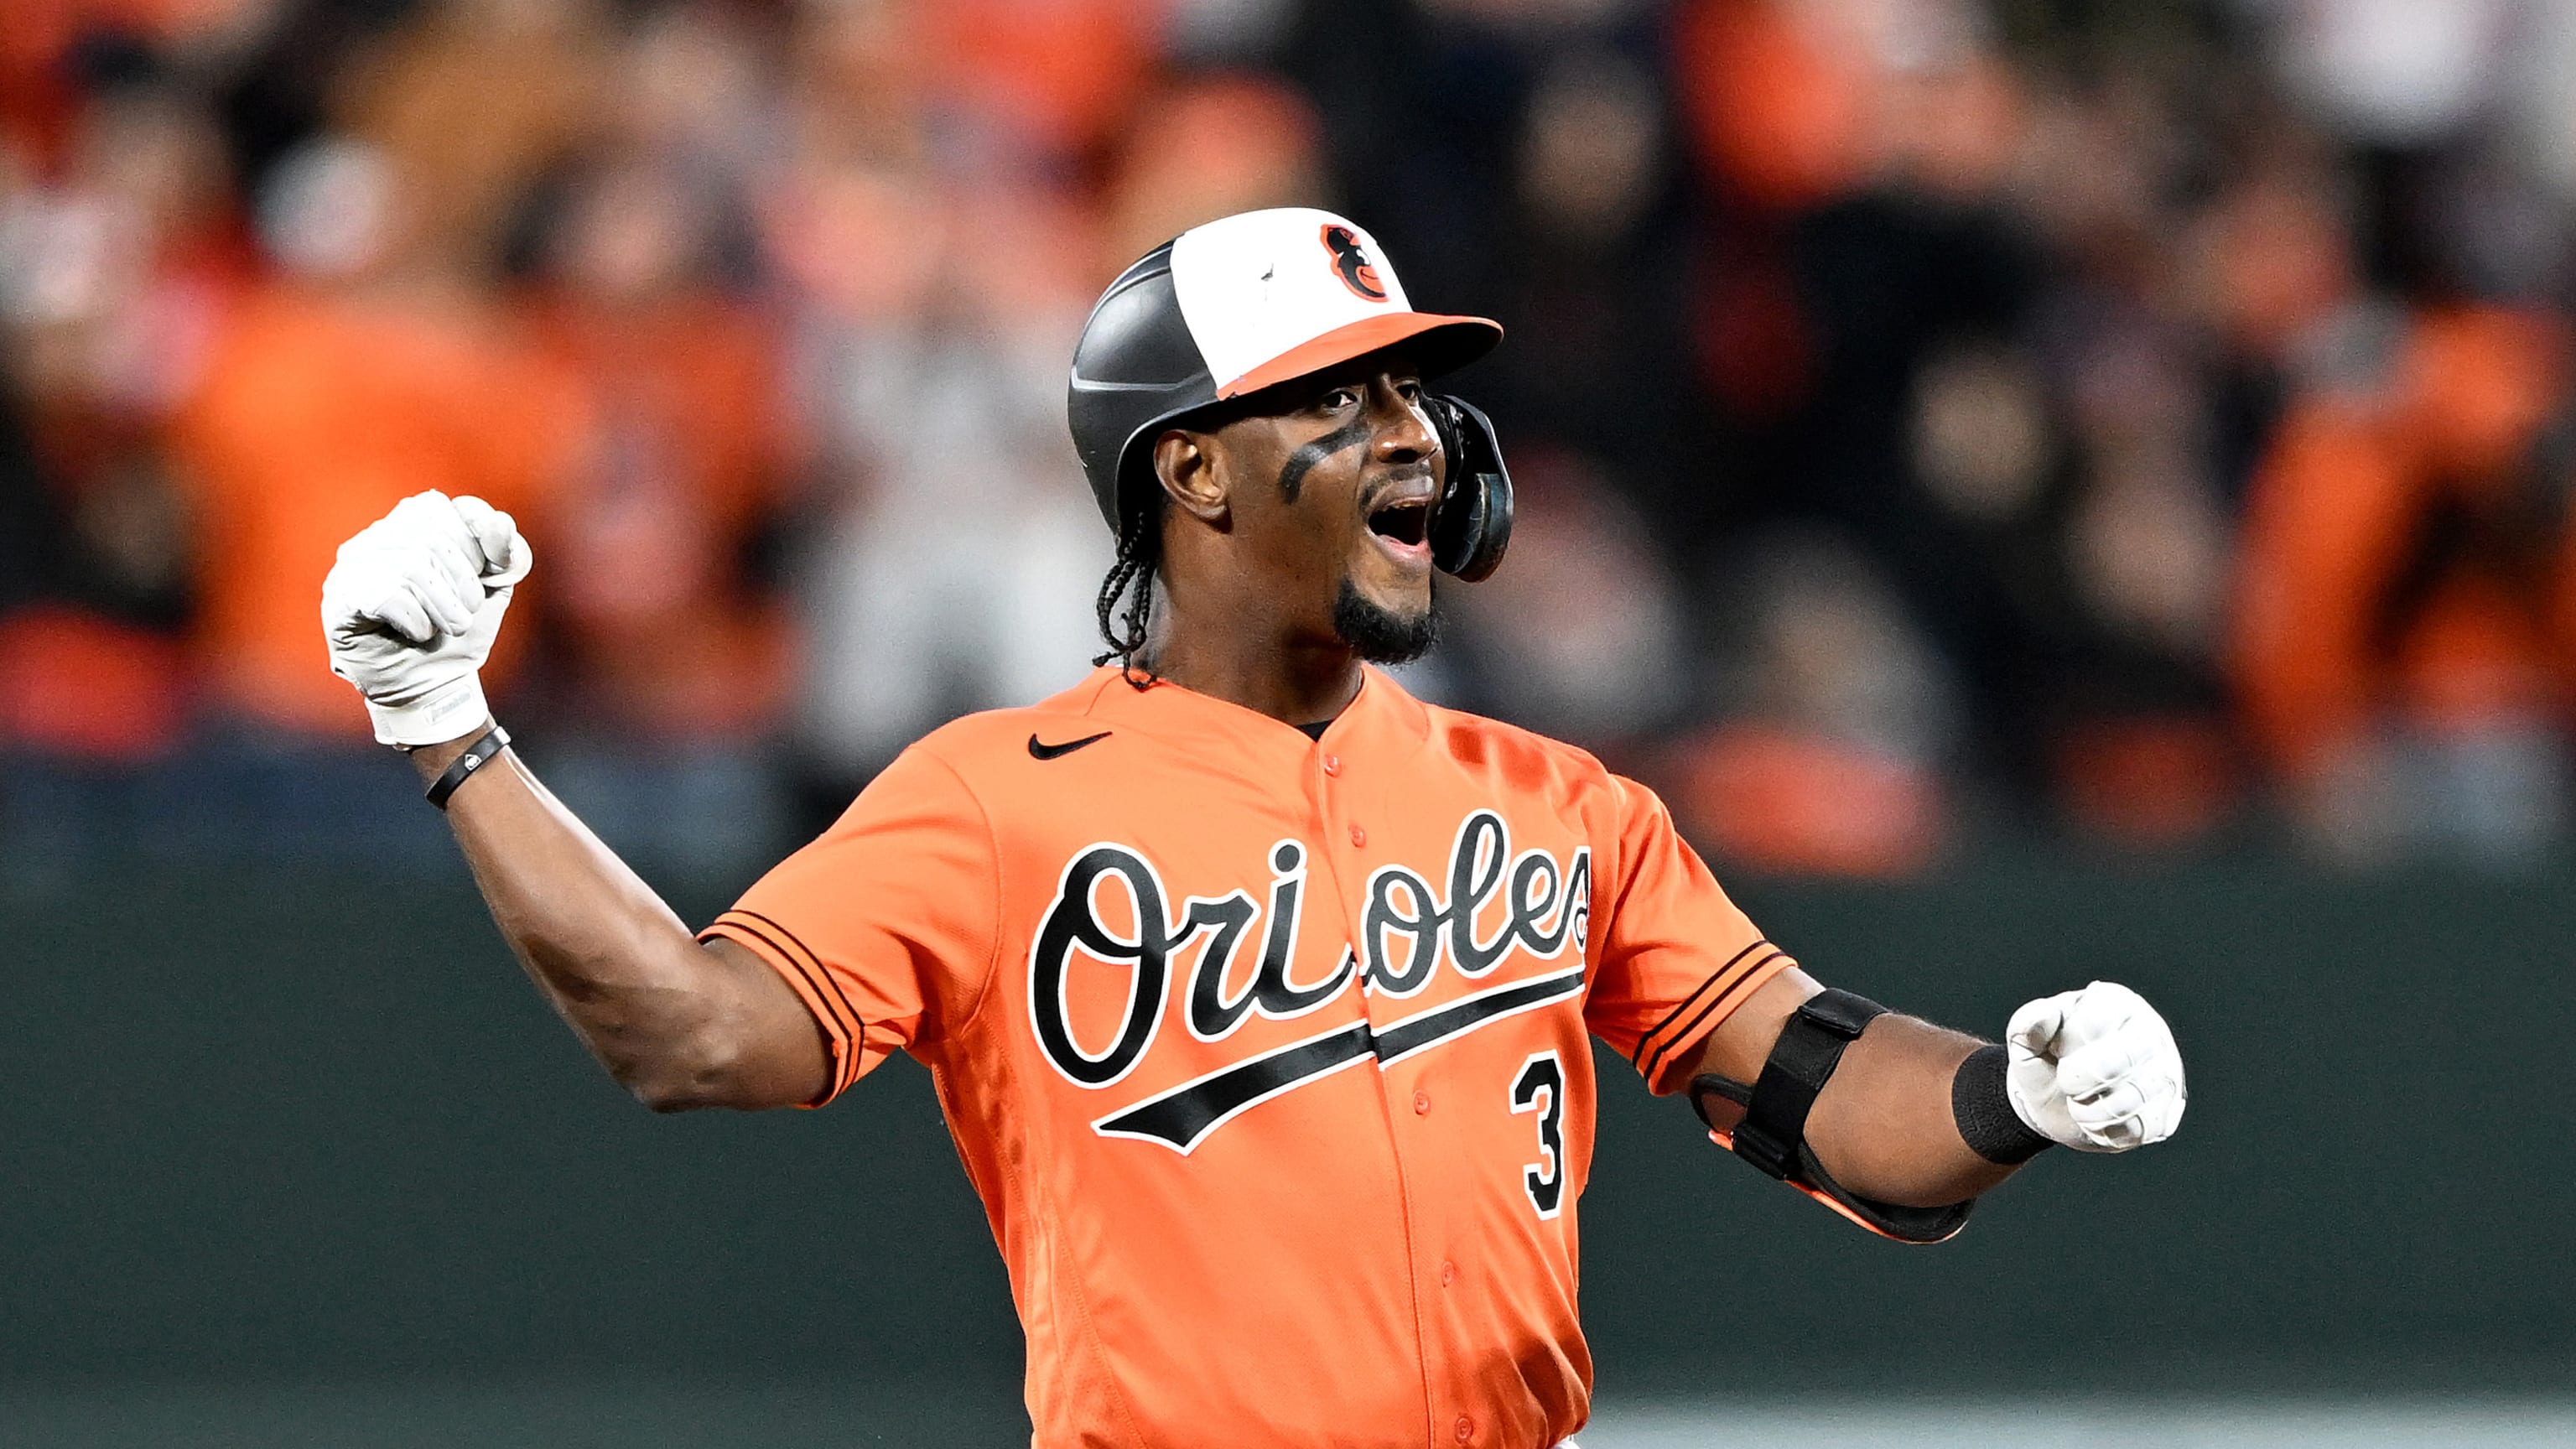 Jorge Mateo powers Orioles to win over Red Sox in Little League Classic:  Things to know 